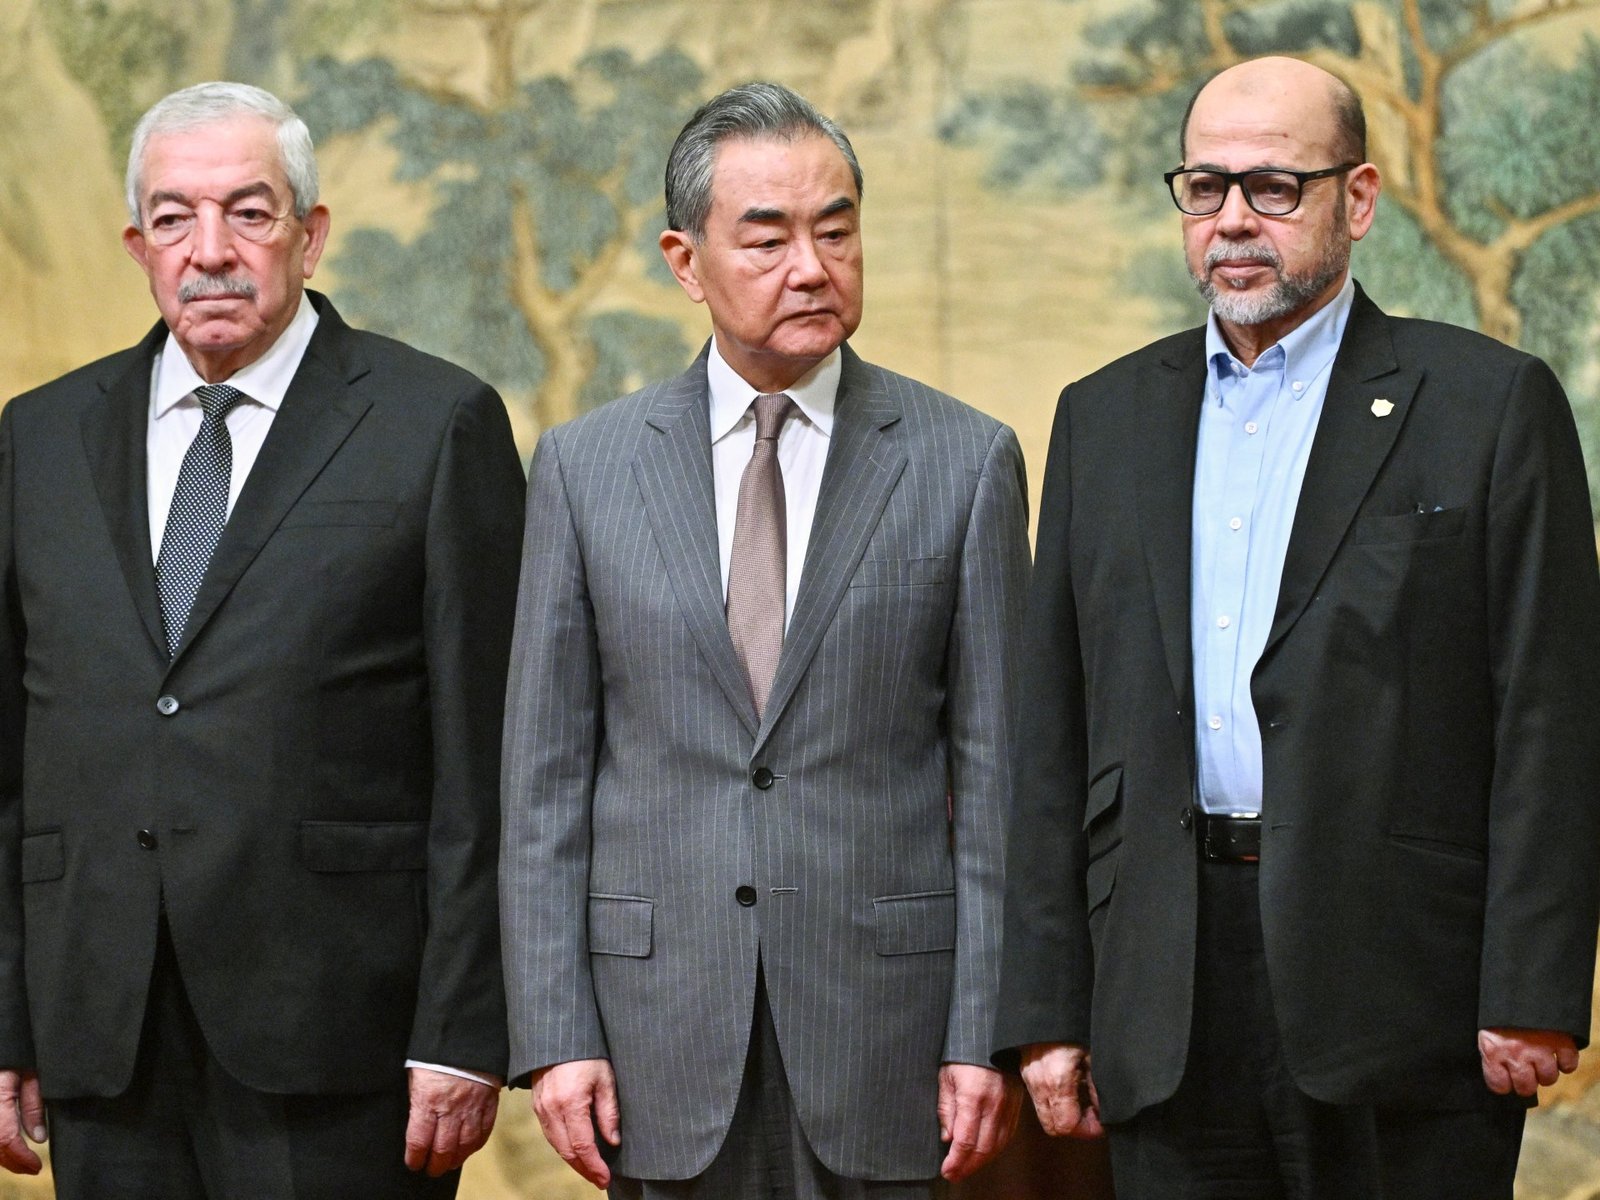 Hamas and Fatah sign unity deal in Beijing aimed at Gaza governance | Israel-Palestine conflict News